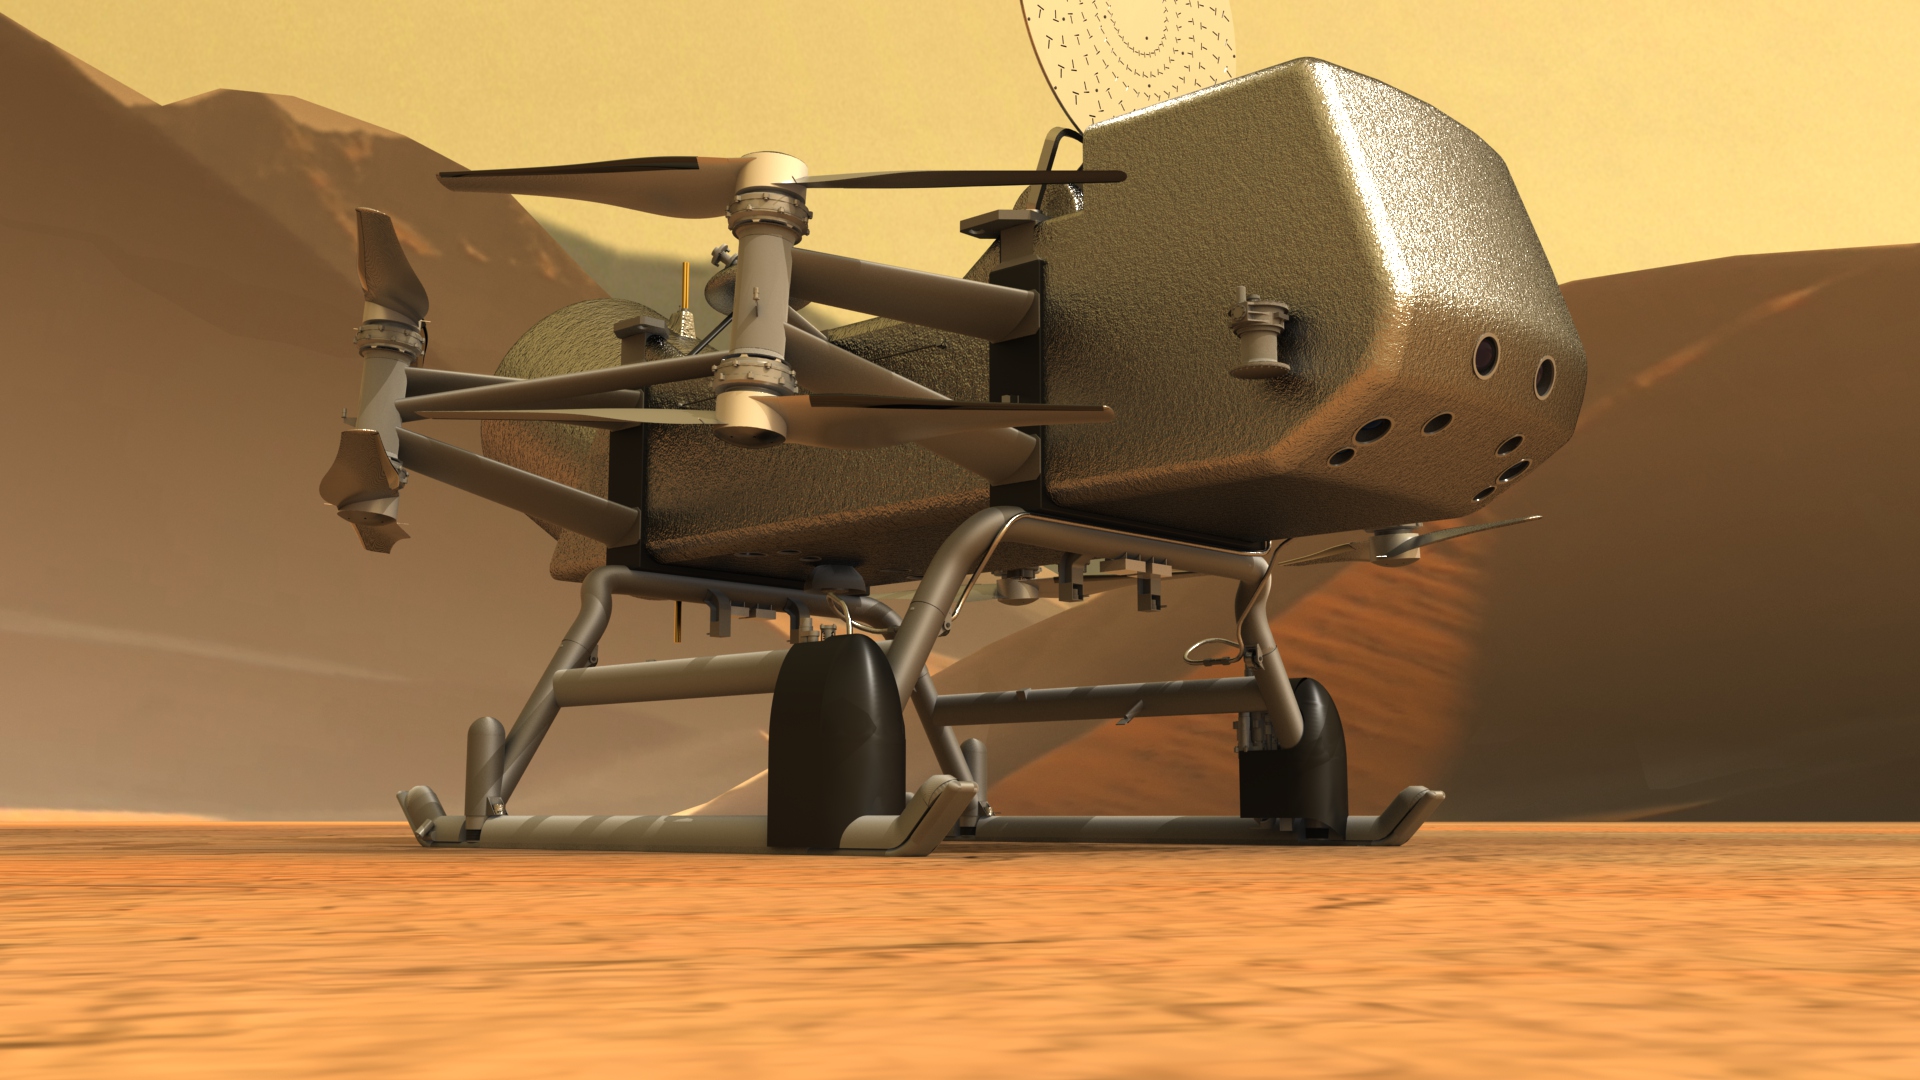 Artist’s impression of NASA’s Dragonfly rotorcraft-lander on the surface of Saturn’s moon Titan